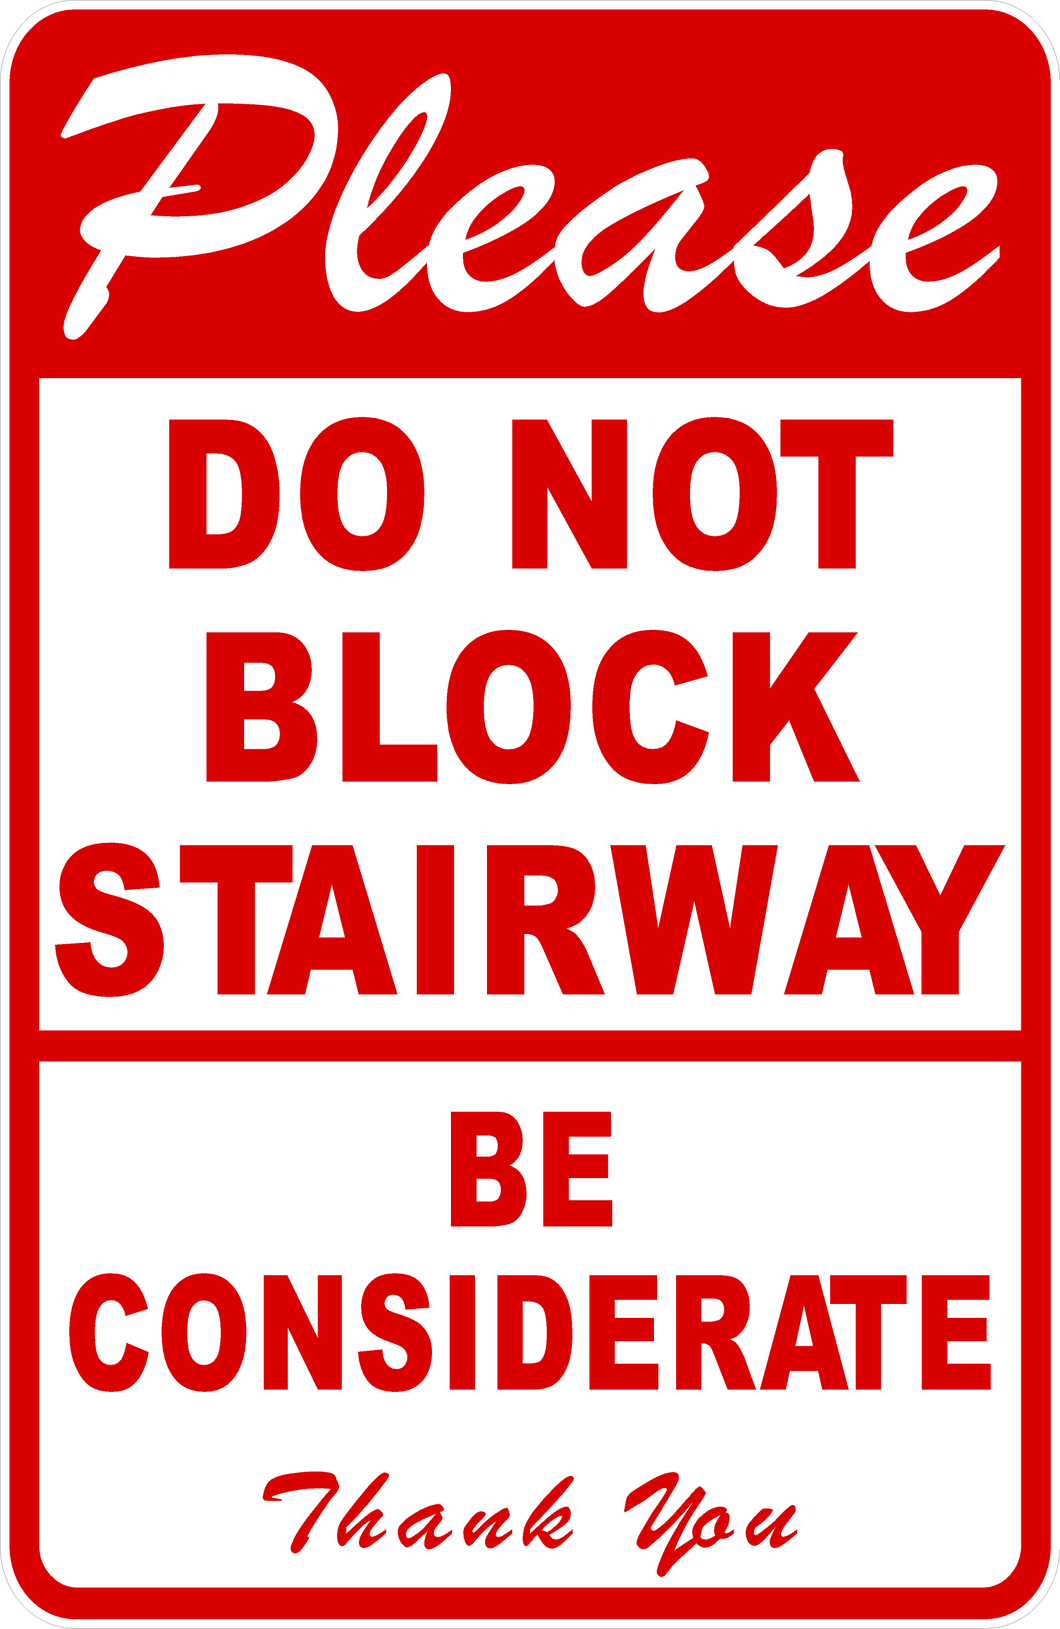 Please Do Not Block Stairway Be Considerate Thank You Sign